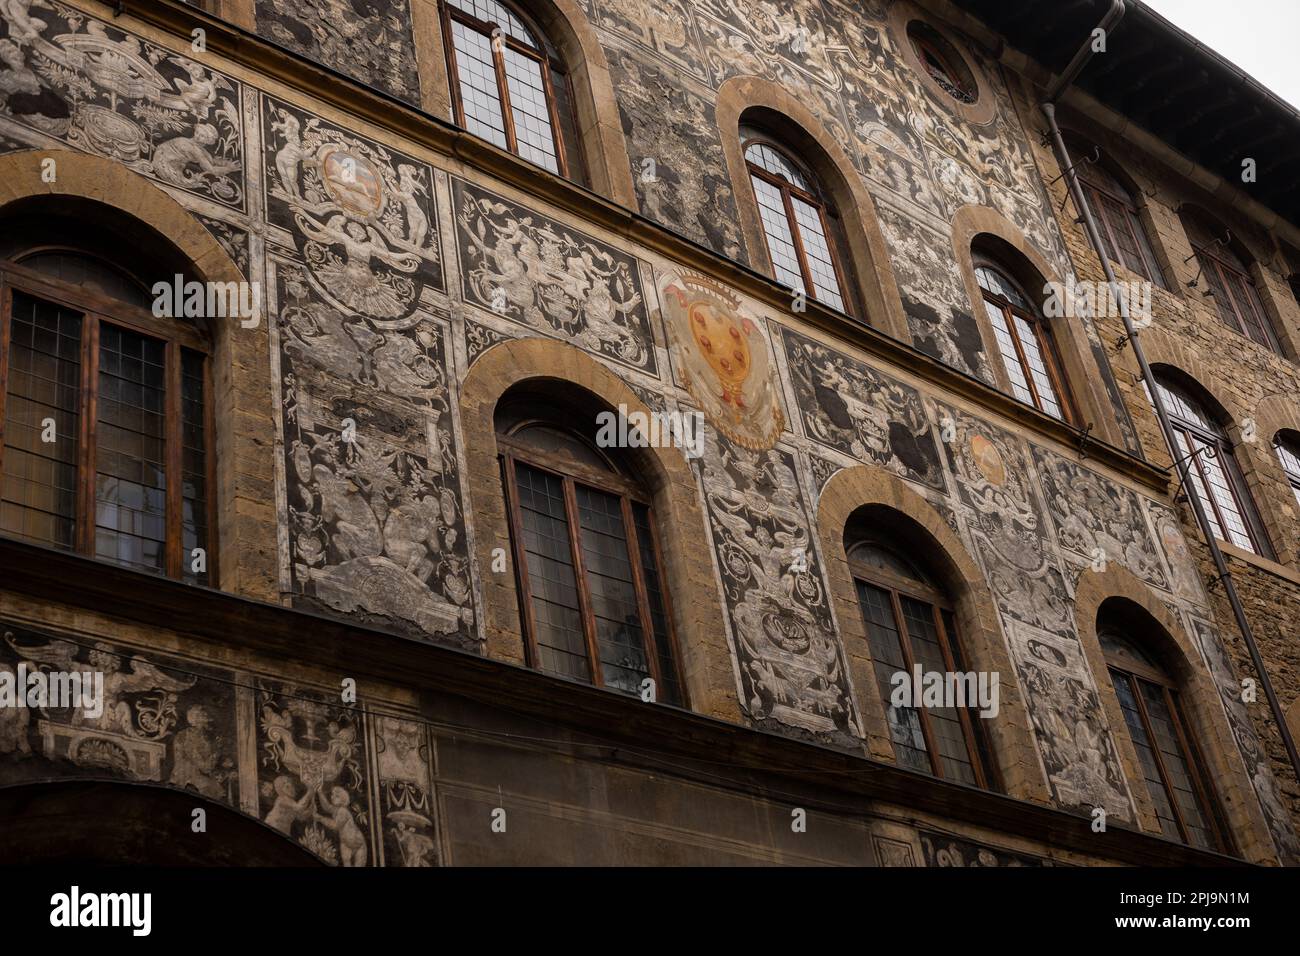 Palazzo di Bianca Cappello with its unique facade decoration. Florence, Italy Stock Photo